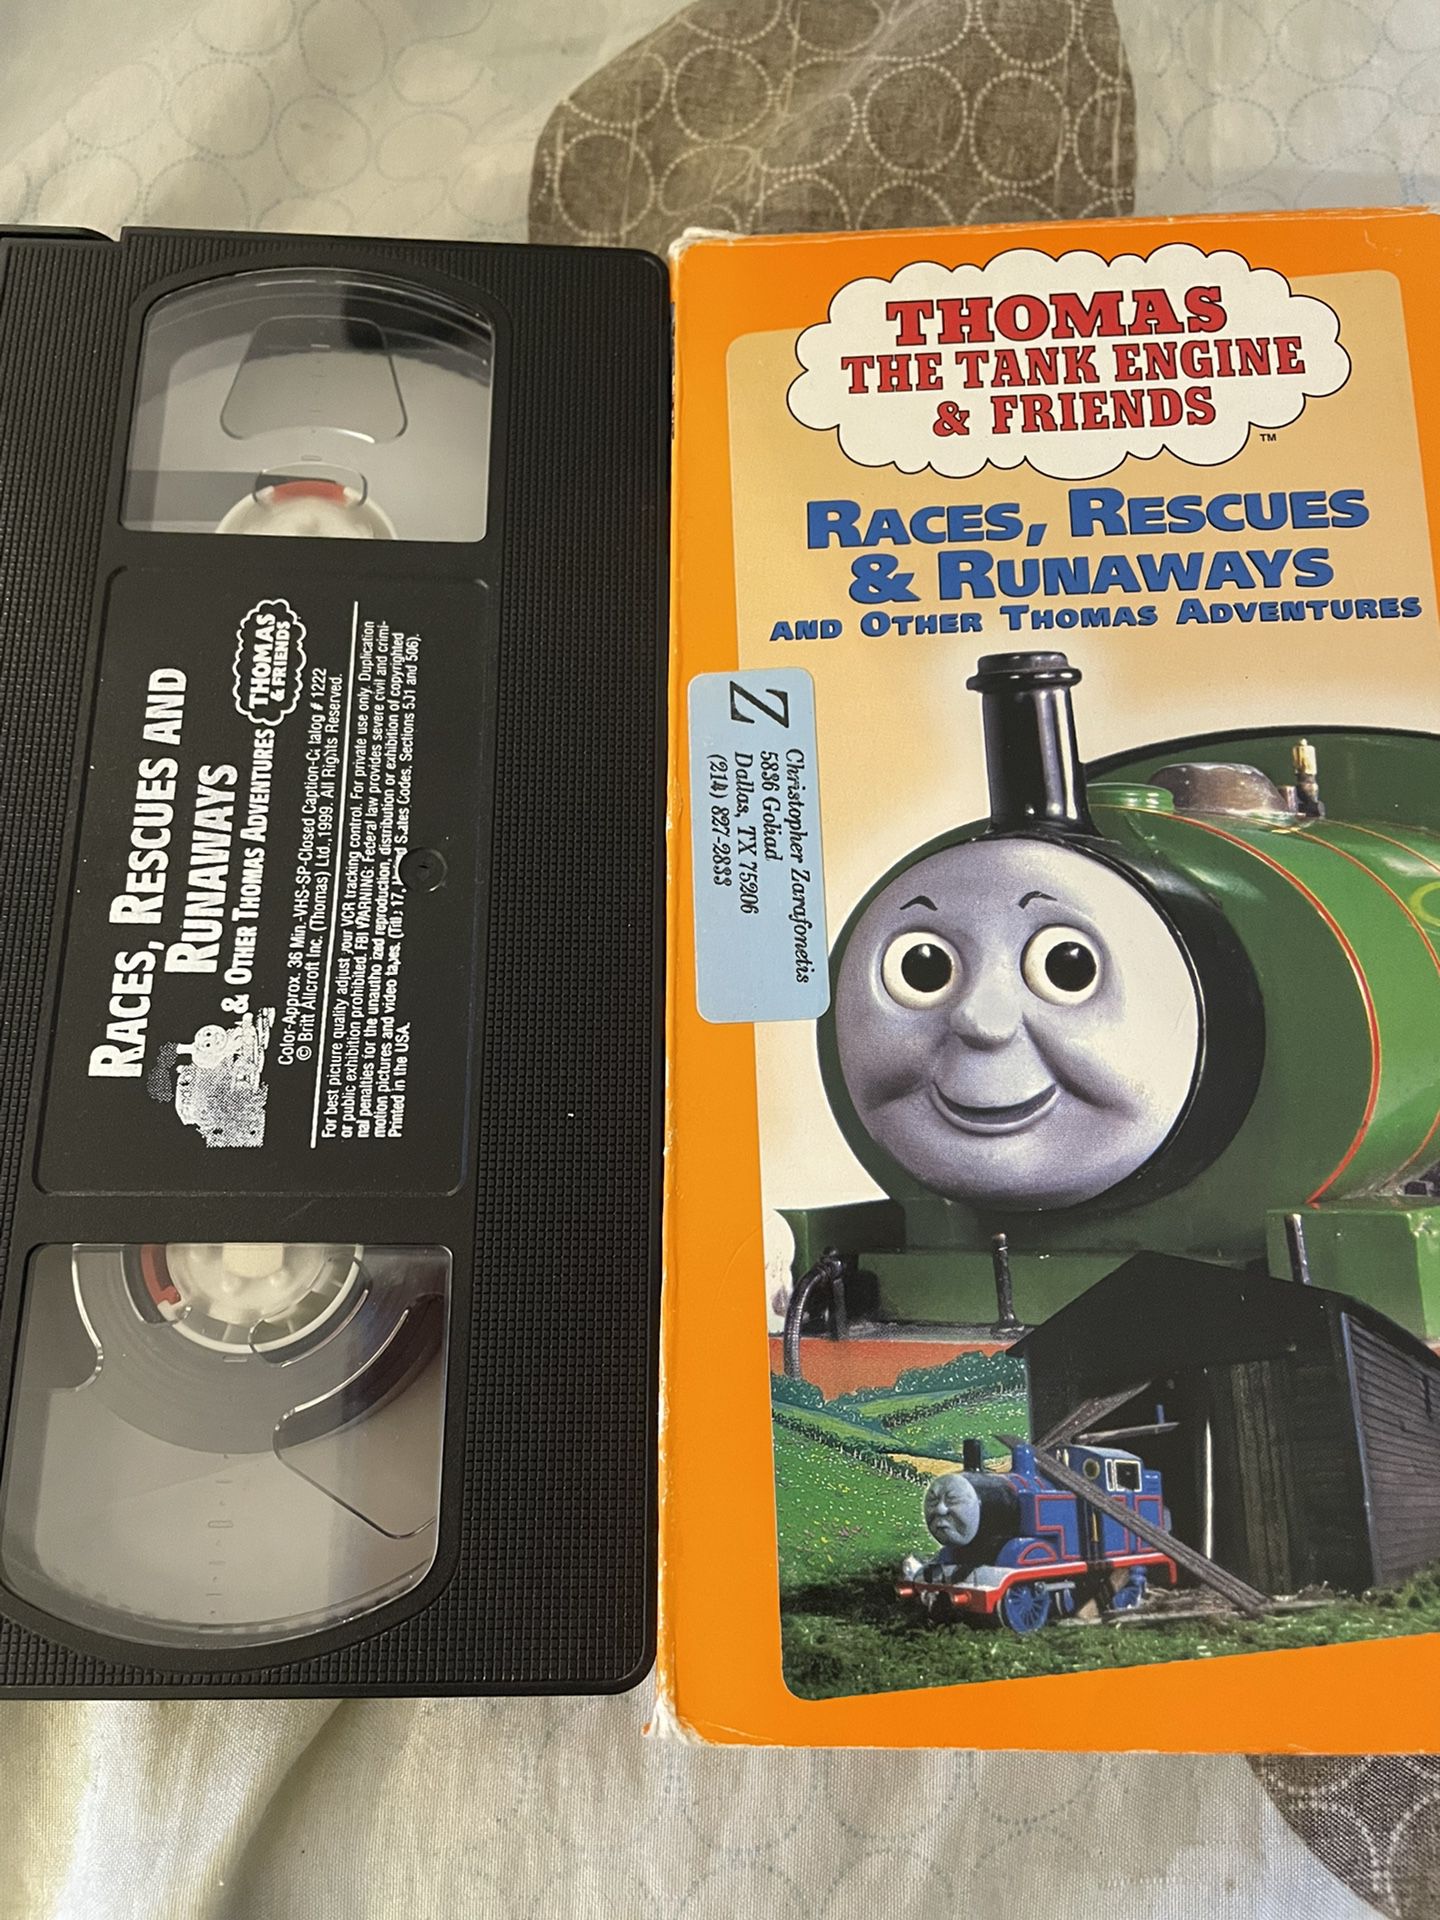 THOMAS THE TANK ENGINE & FRIENDS: RACES, RESCUES & RUNAWAYS AND OTHER THOMAS ADVENTURES (VHS)